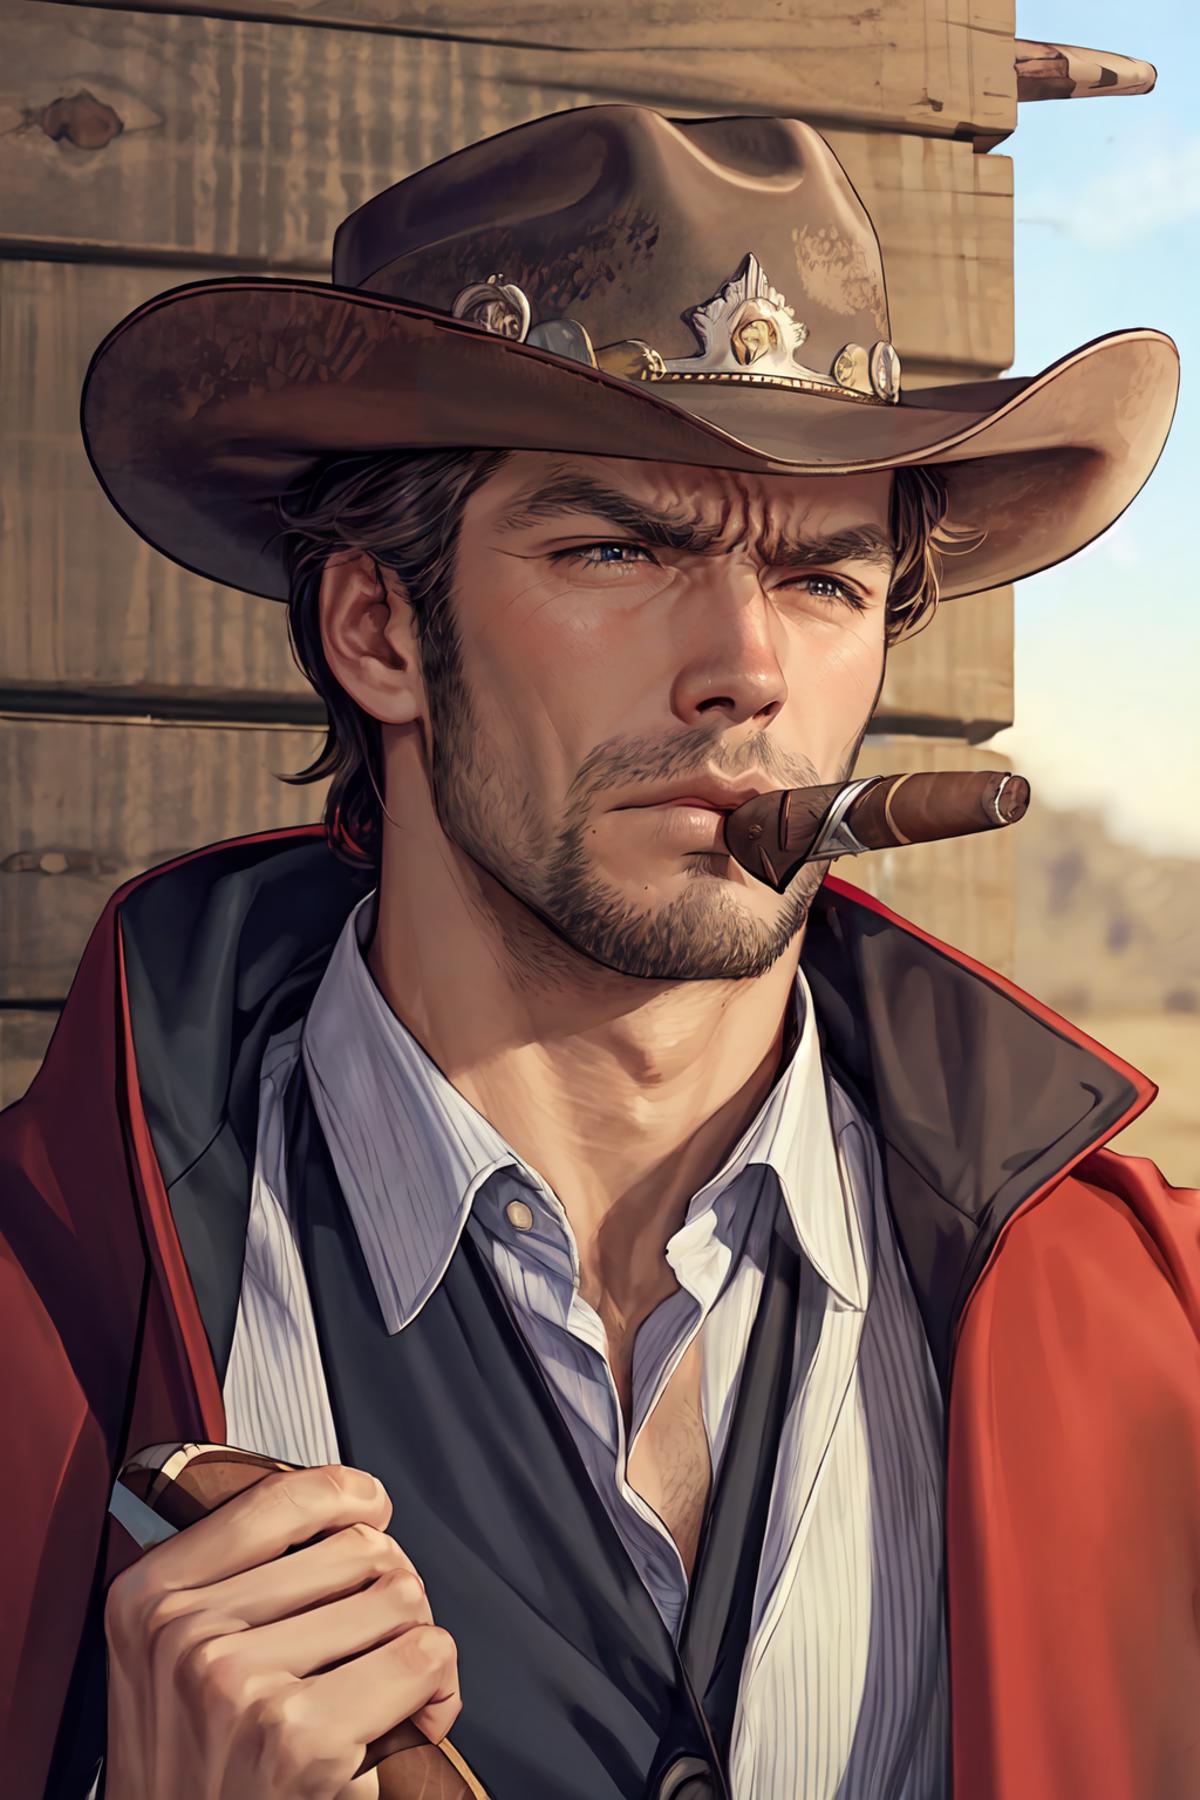 Clint Eastwood (The Good, the Bad and the Ugly) image by SecretEGGNOG